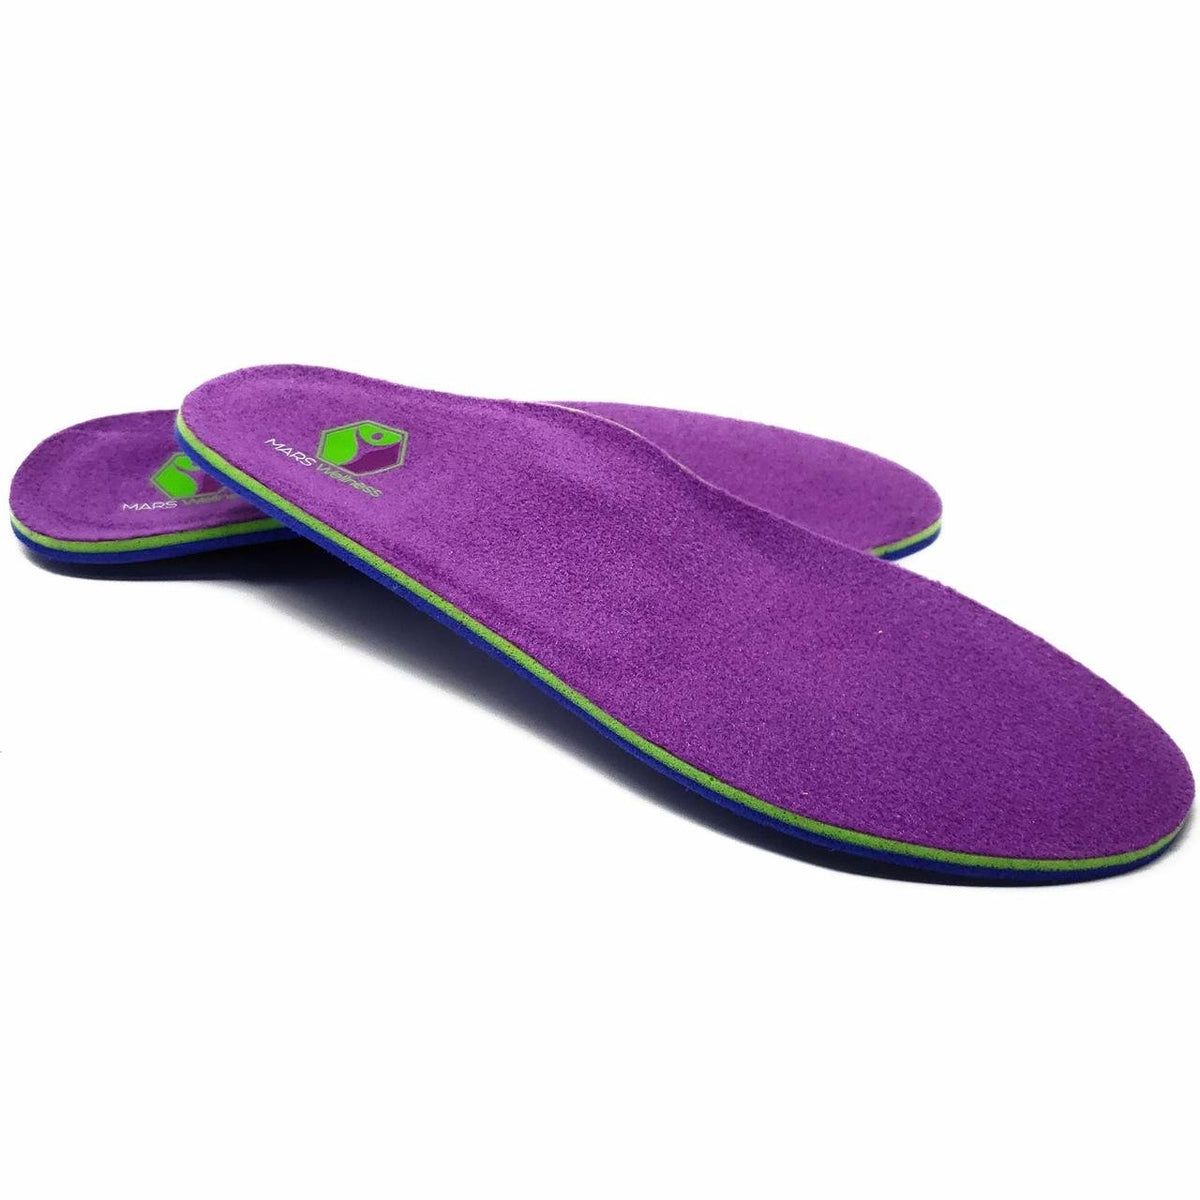 MARS WELLNESS POWERTRAQ Active Orthotic Medical Grade Low to Moderate Arch Support Orthopedic Orthotic Insoles - Plantar Fasciitis, Flat Feet, Foot Pain - by Mars Wellness - Medium